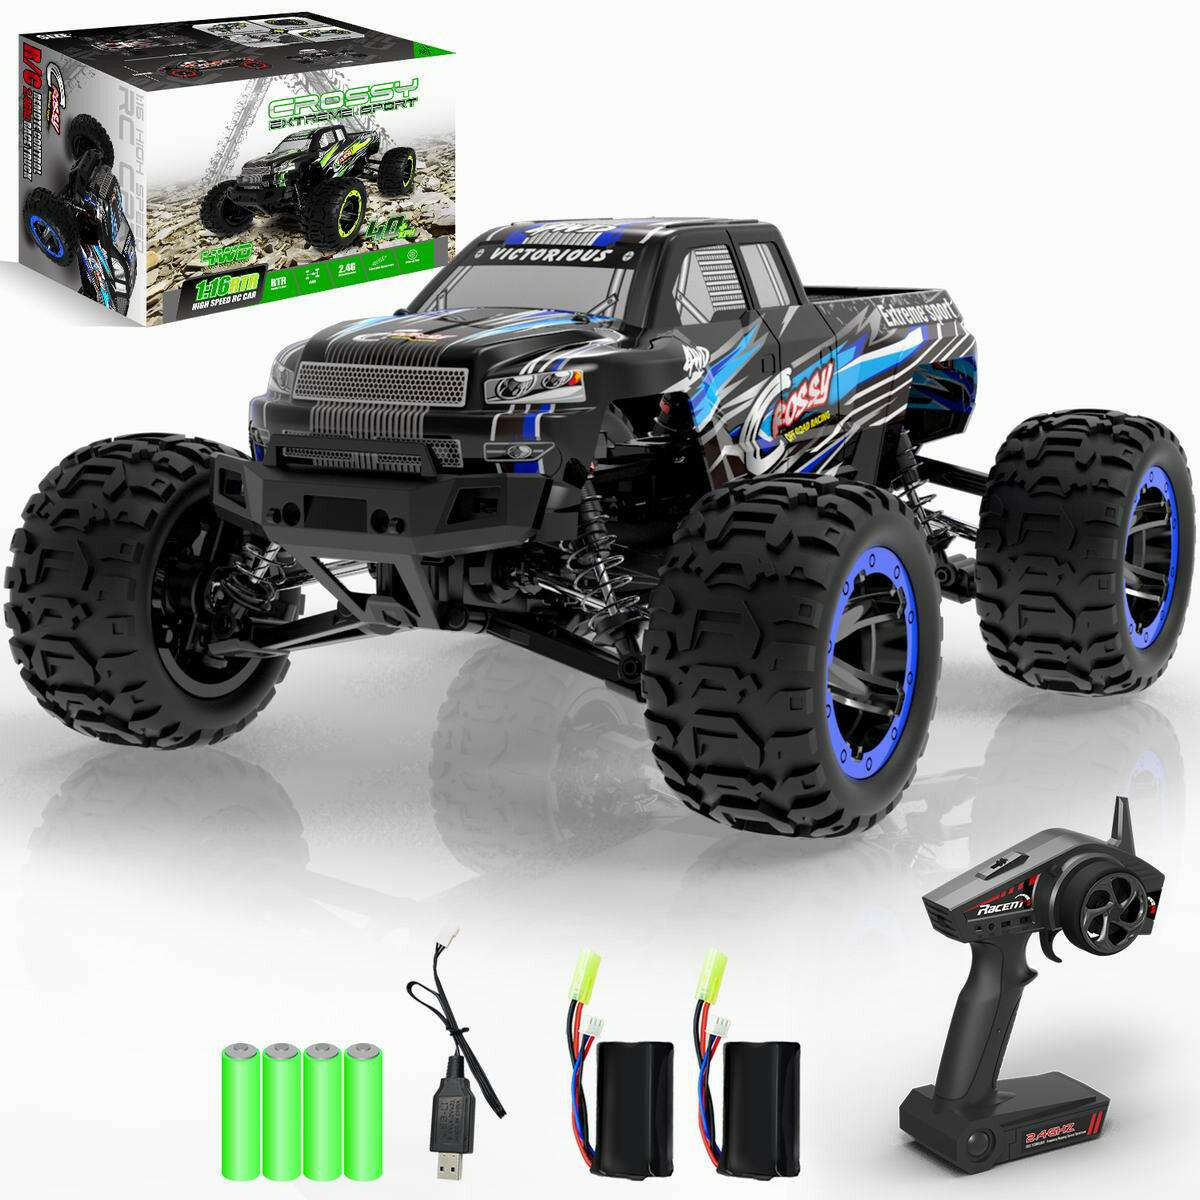 Racent Remote Control Car 4WD Off-Road RC Monster Truck 1:16 Scale 30MPH High Speed All Terrain RC Vehicle for Kids or Adults (785-5) (Blue).